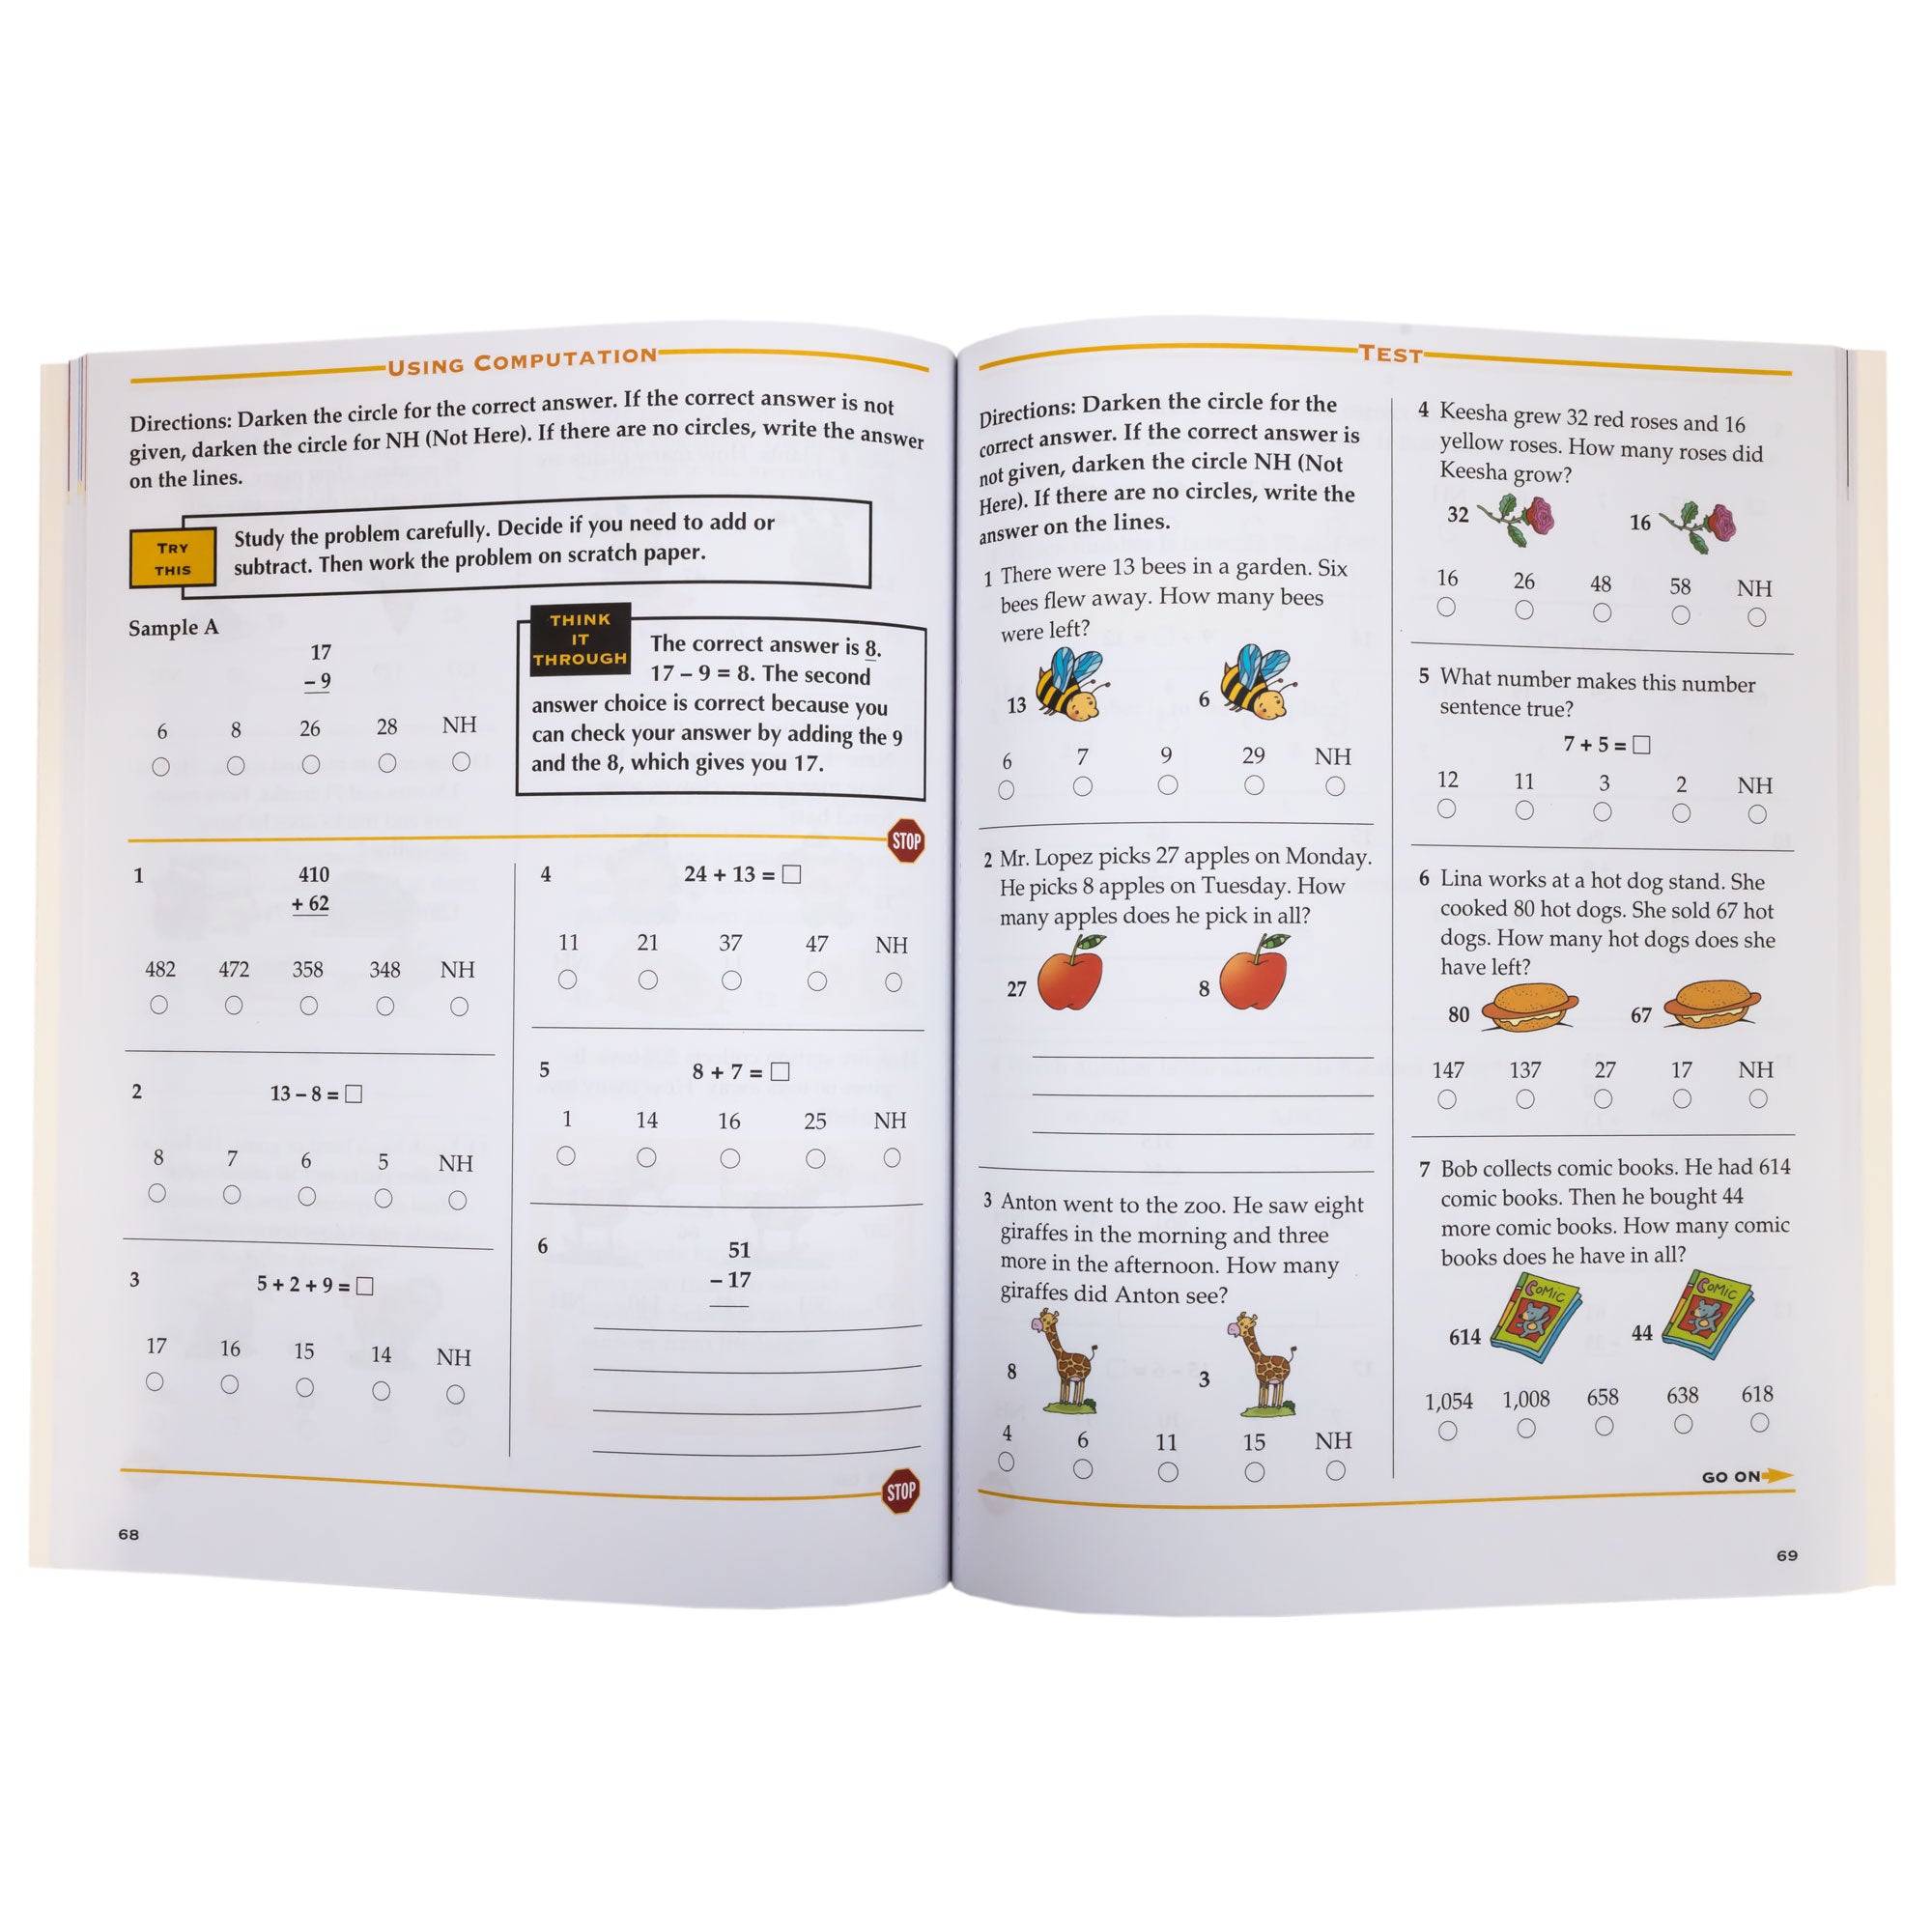 Test Prep Grade 2 book open to show inside pages. The left page, titled “Using Computation,” has 6 multiple choice problems with a sample question at the top. The right page, titled “Test,” has 7 multiple choice problems with several illustrations.